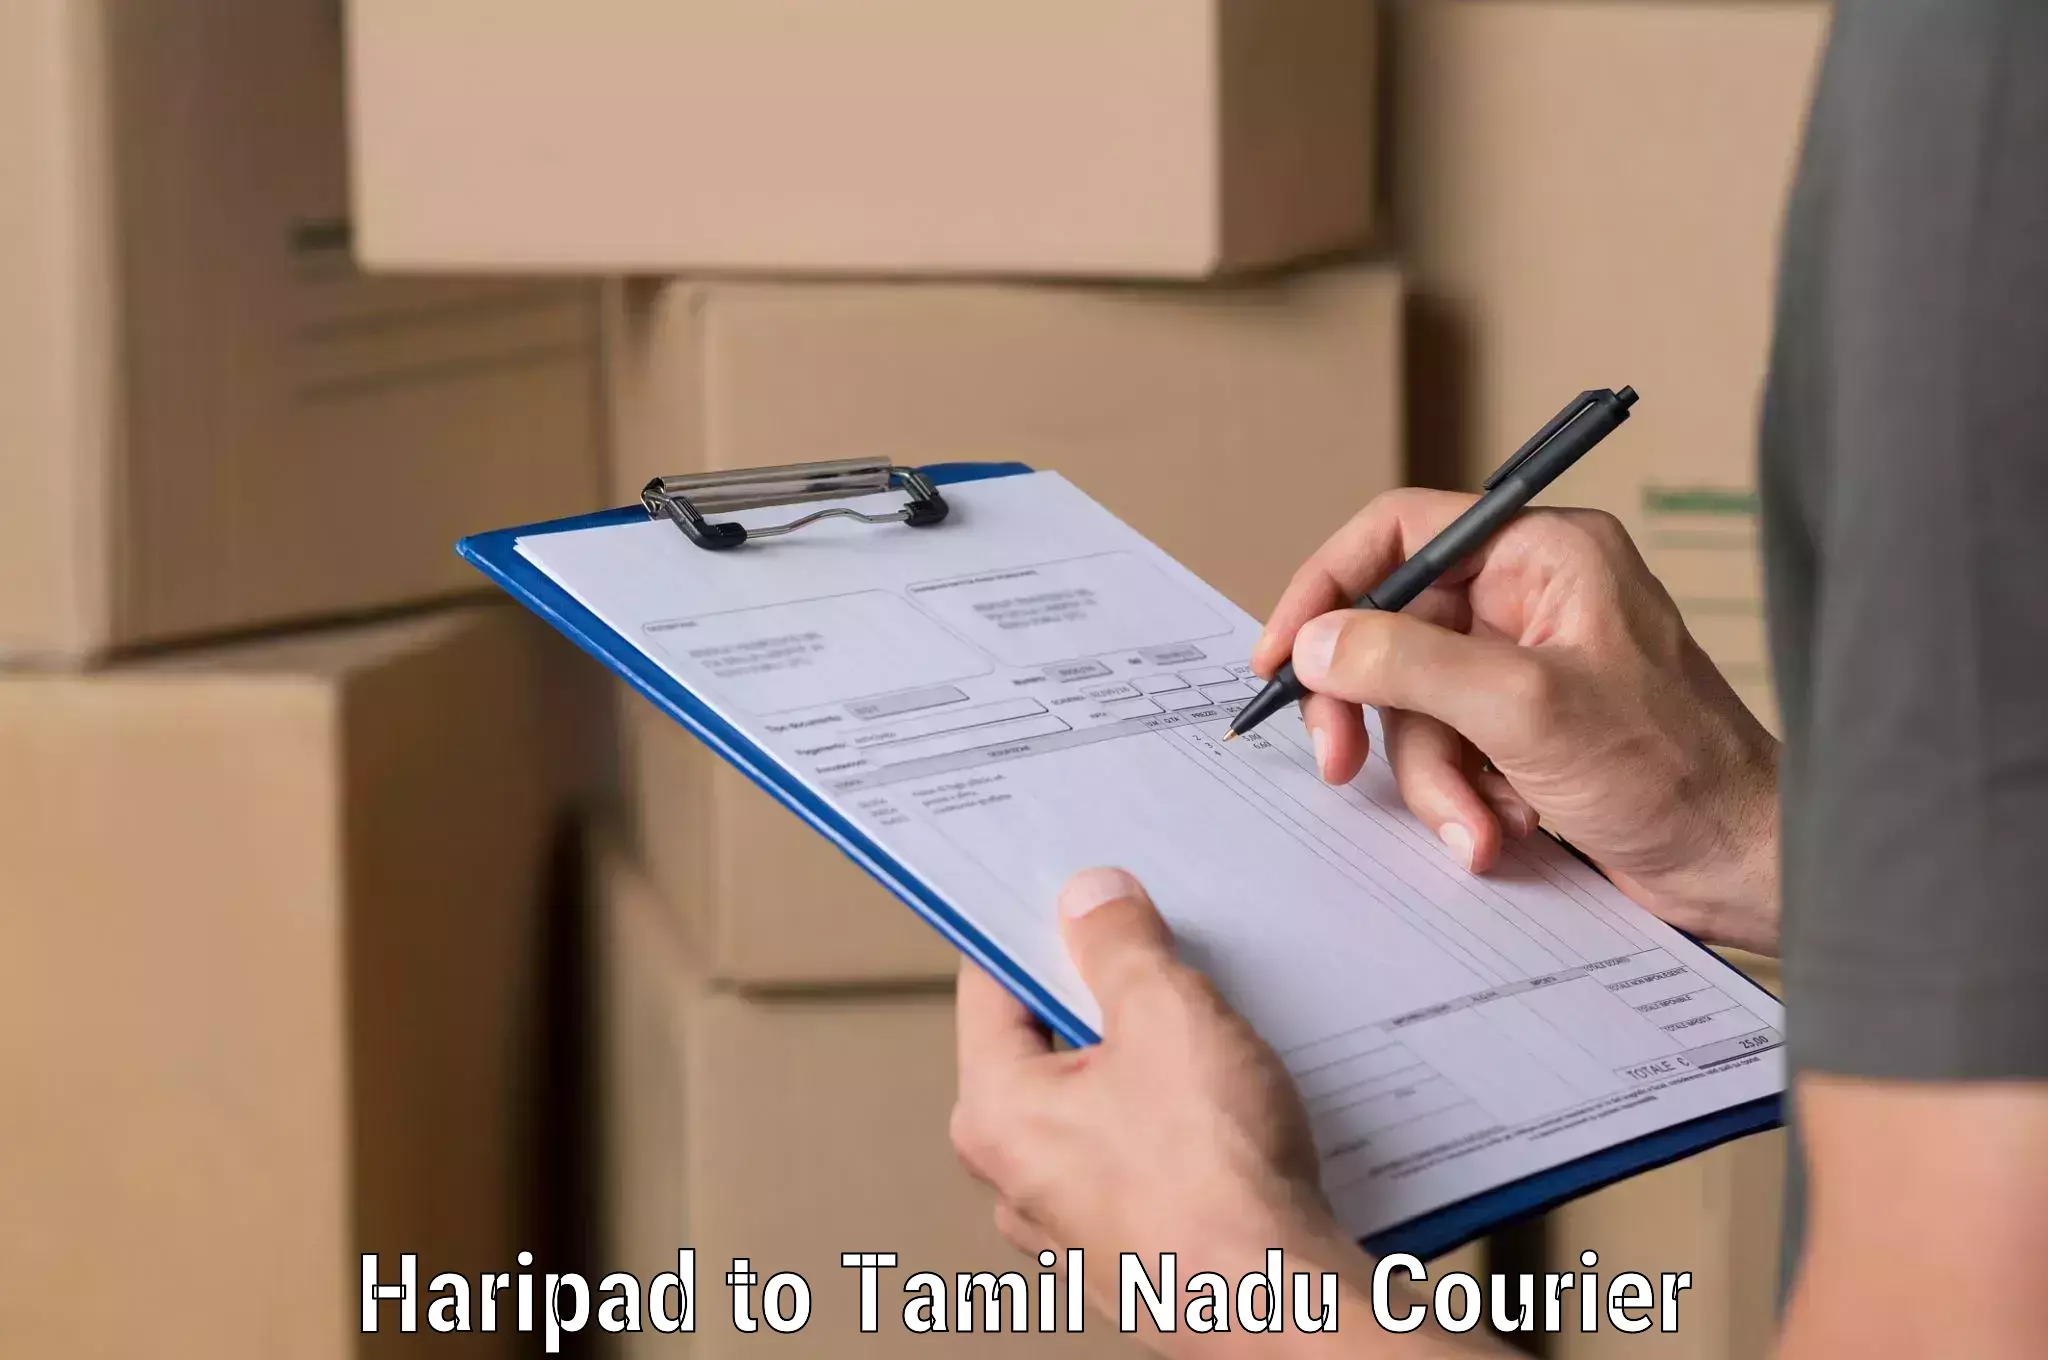 24-hour courier services Haripad to Manamelkudi